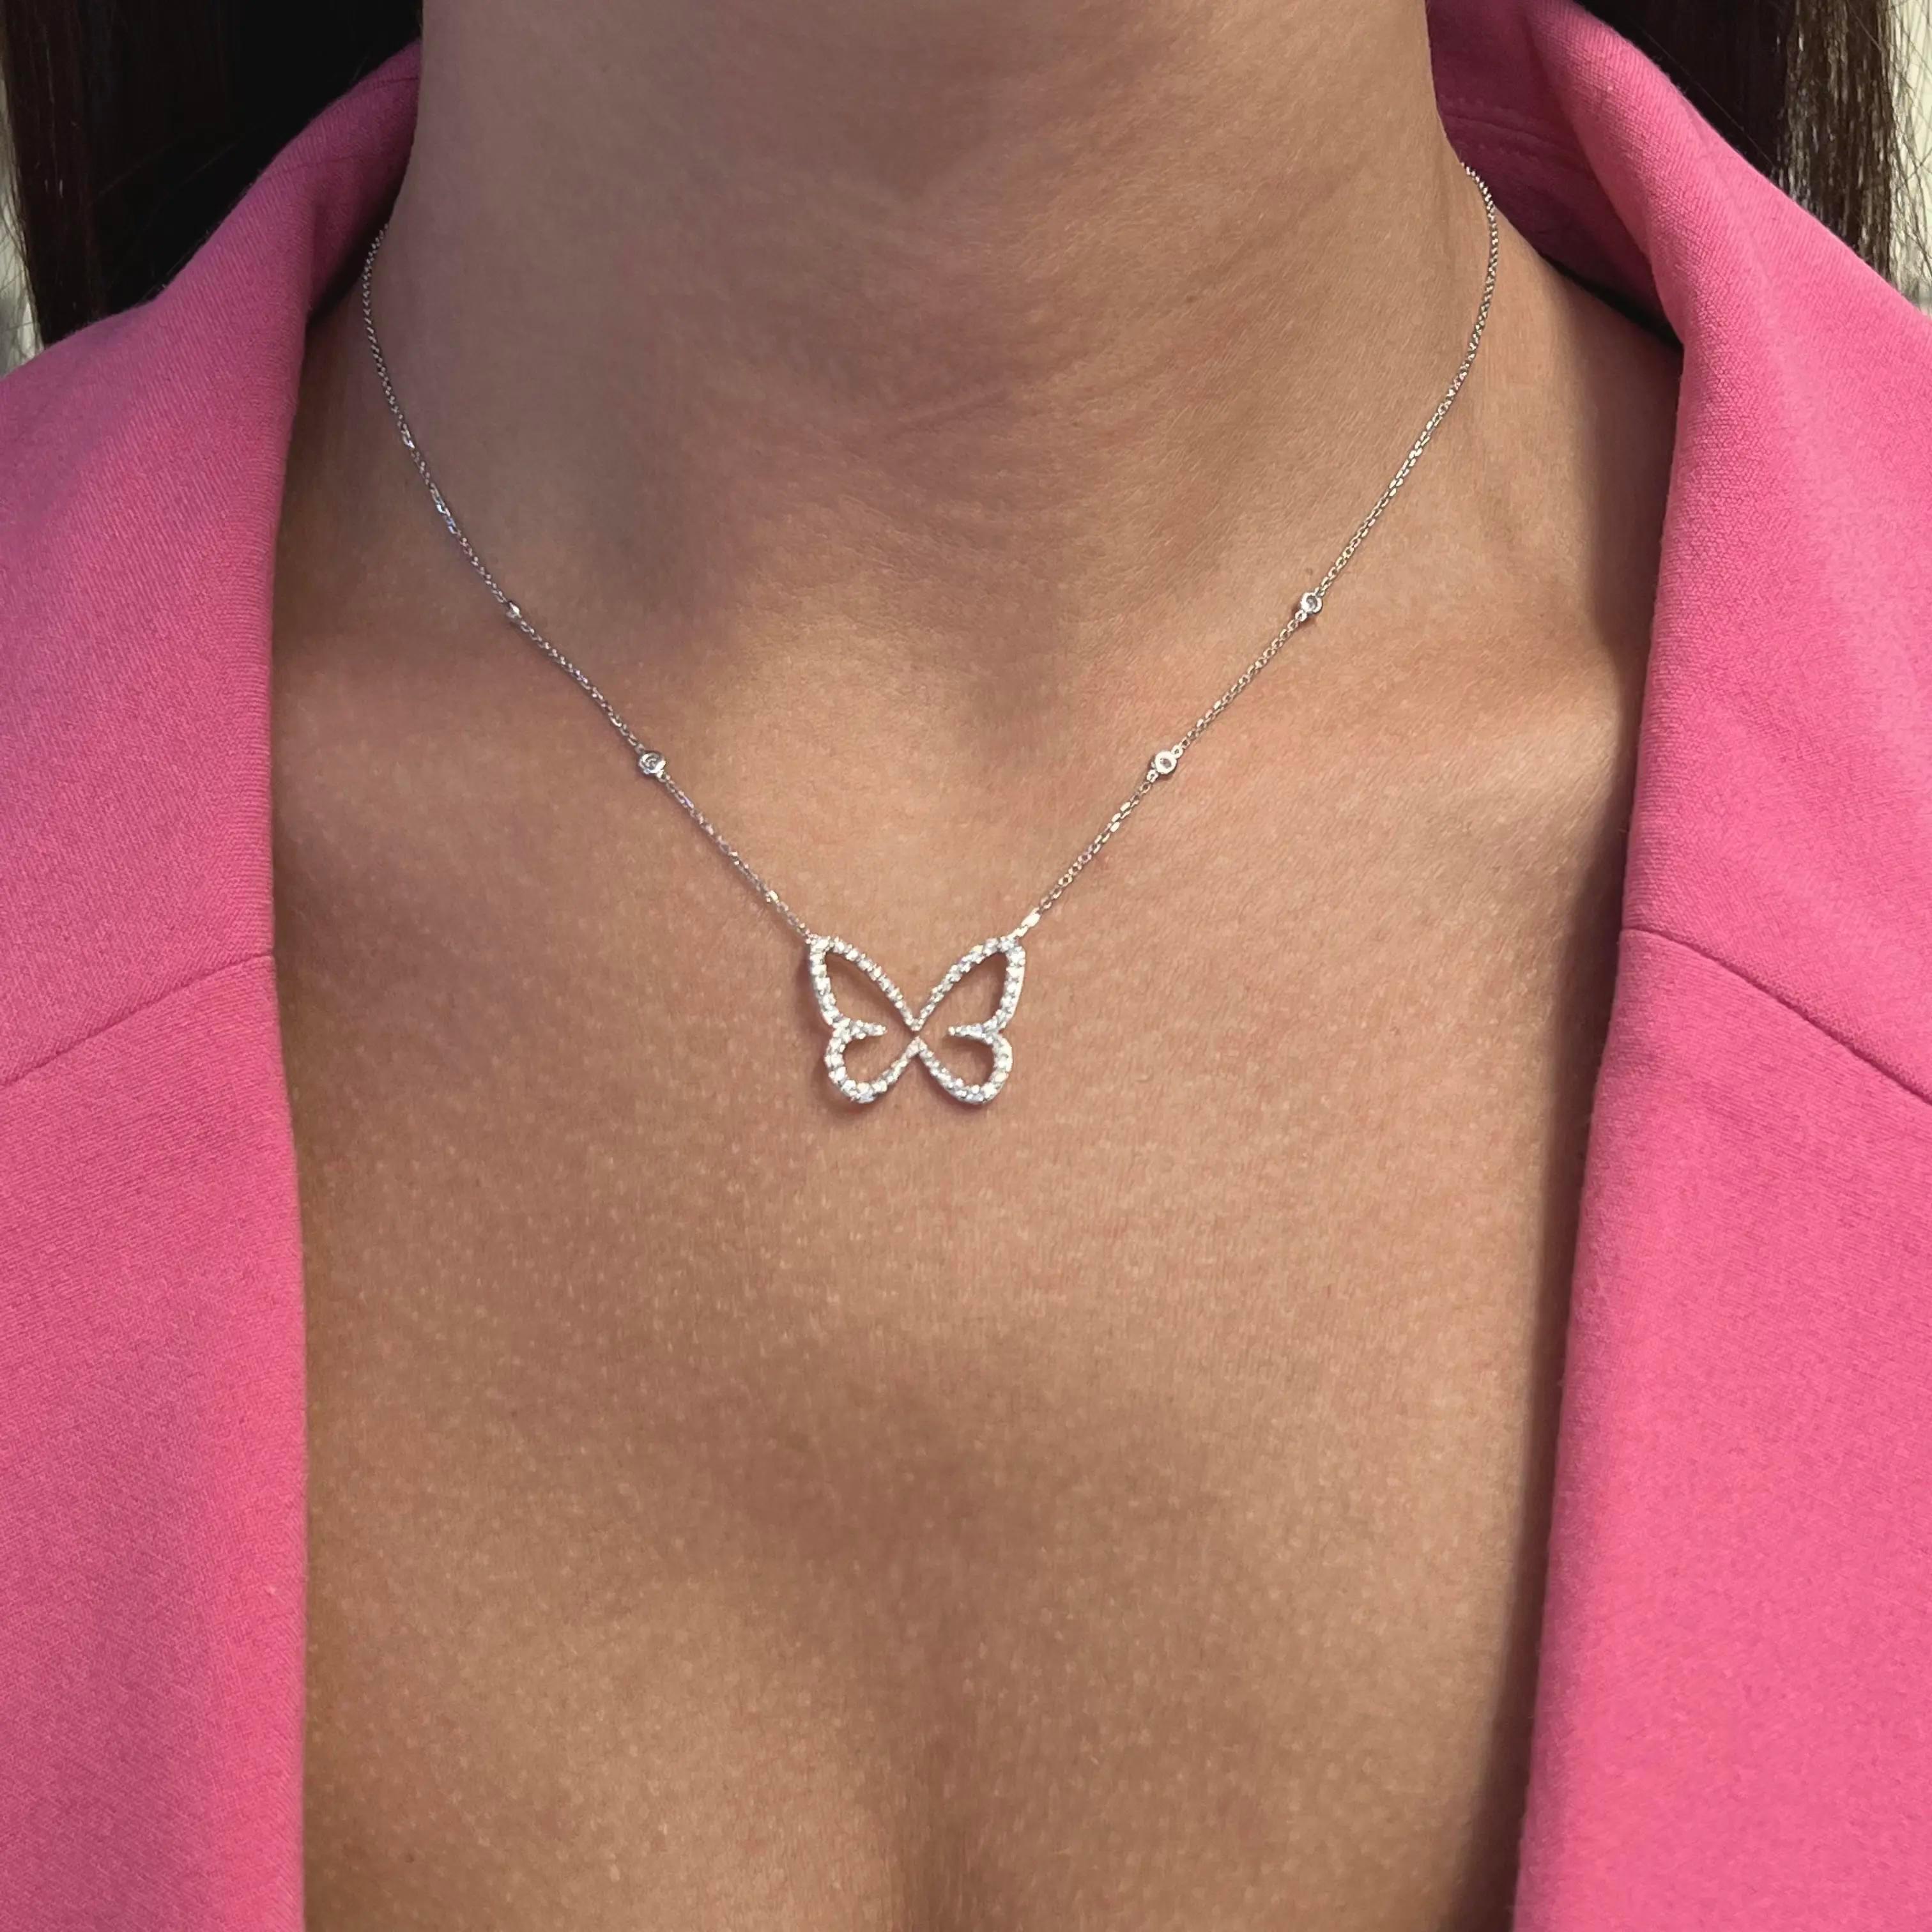 Messika 0.57Cttw Butterfly Ajoure Diamond Pendant Necklace 18K White Gold 17 In Neuf à New York, NY